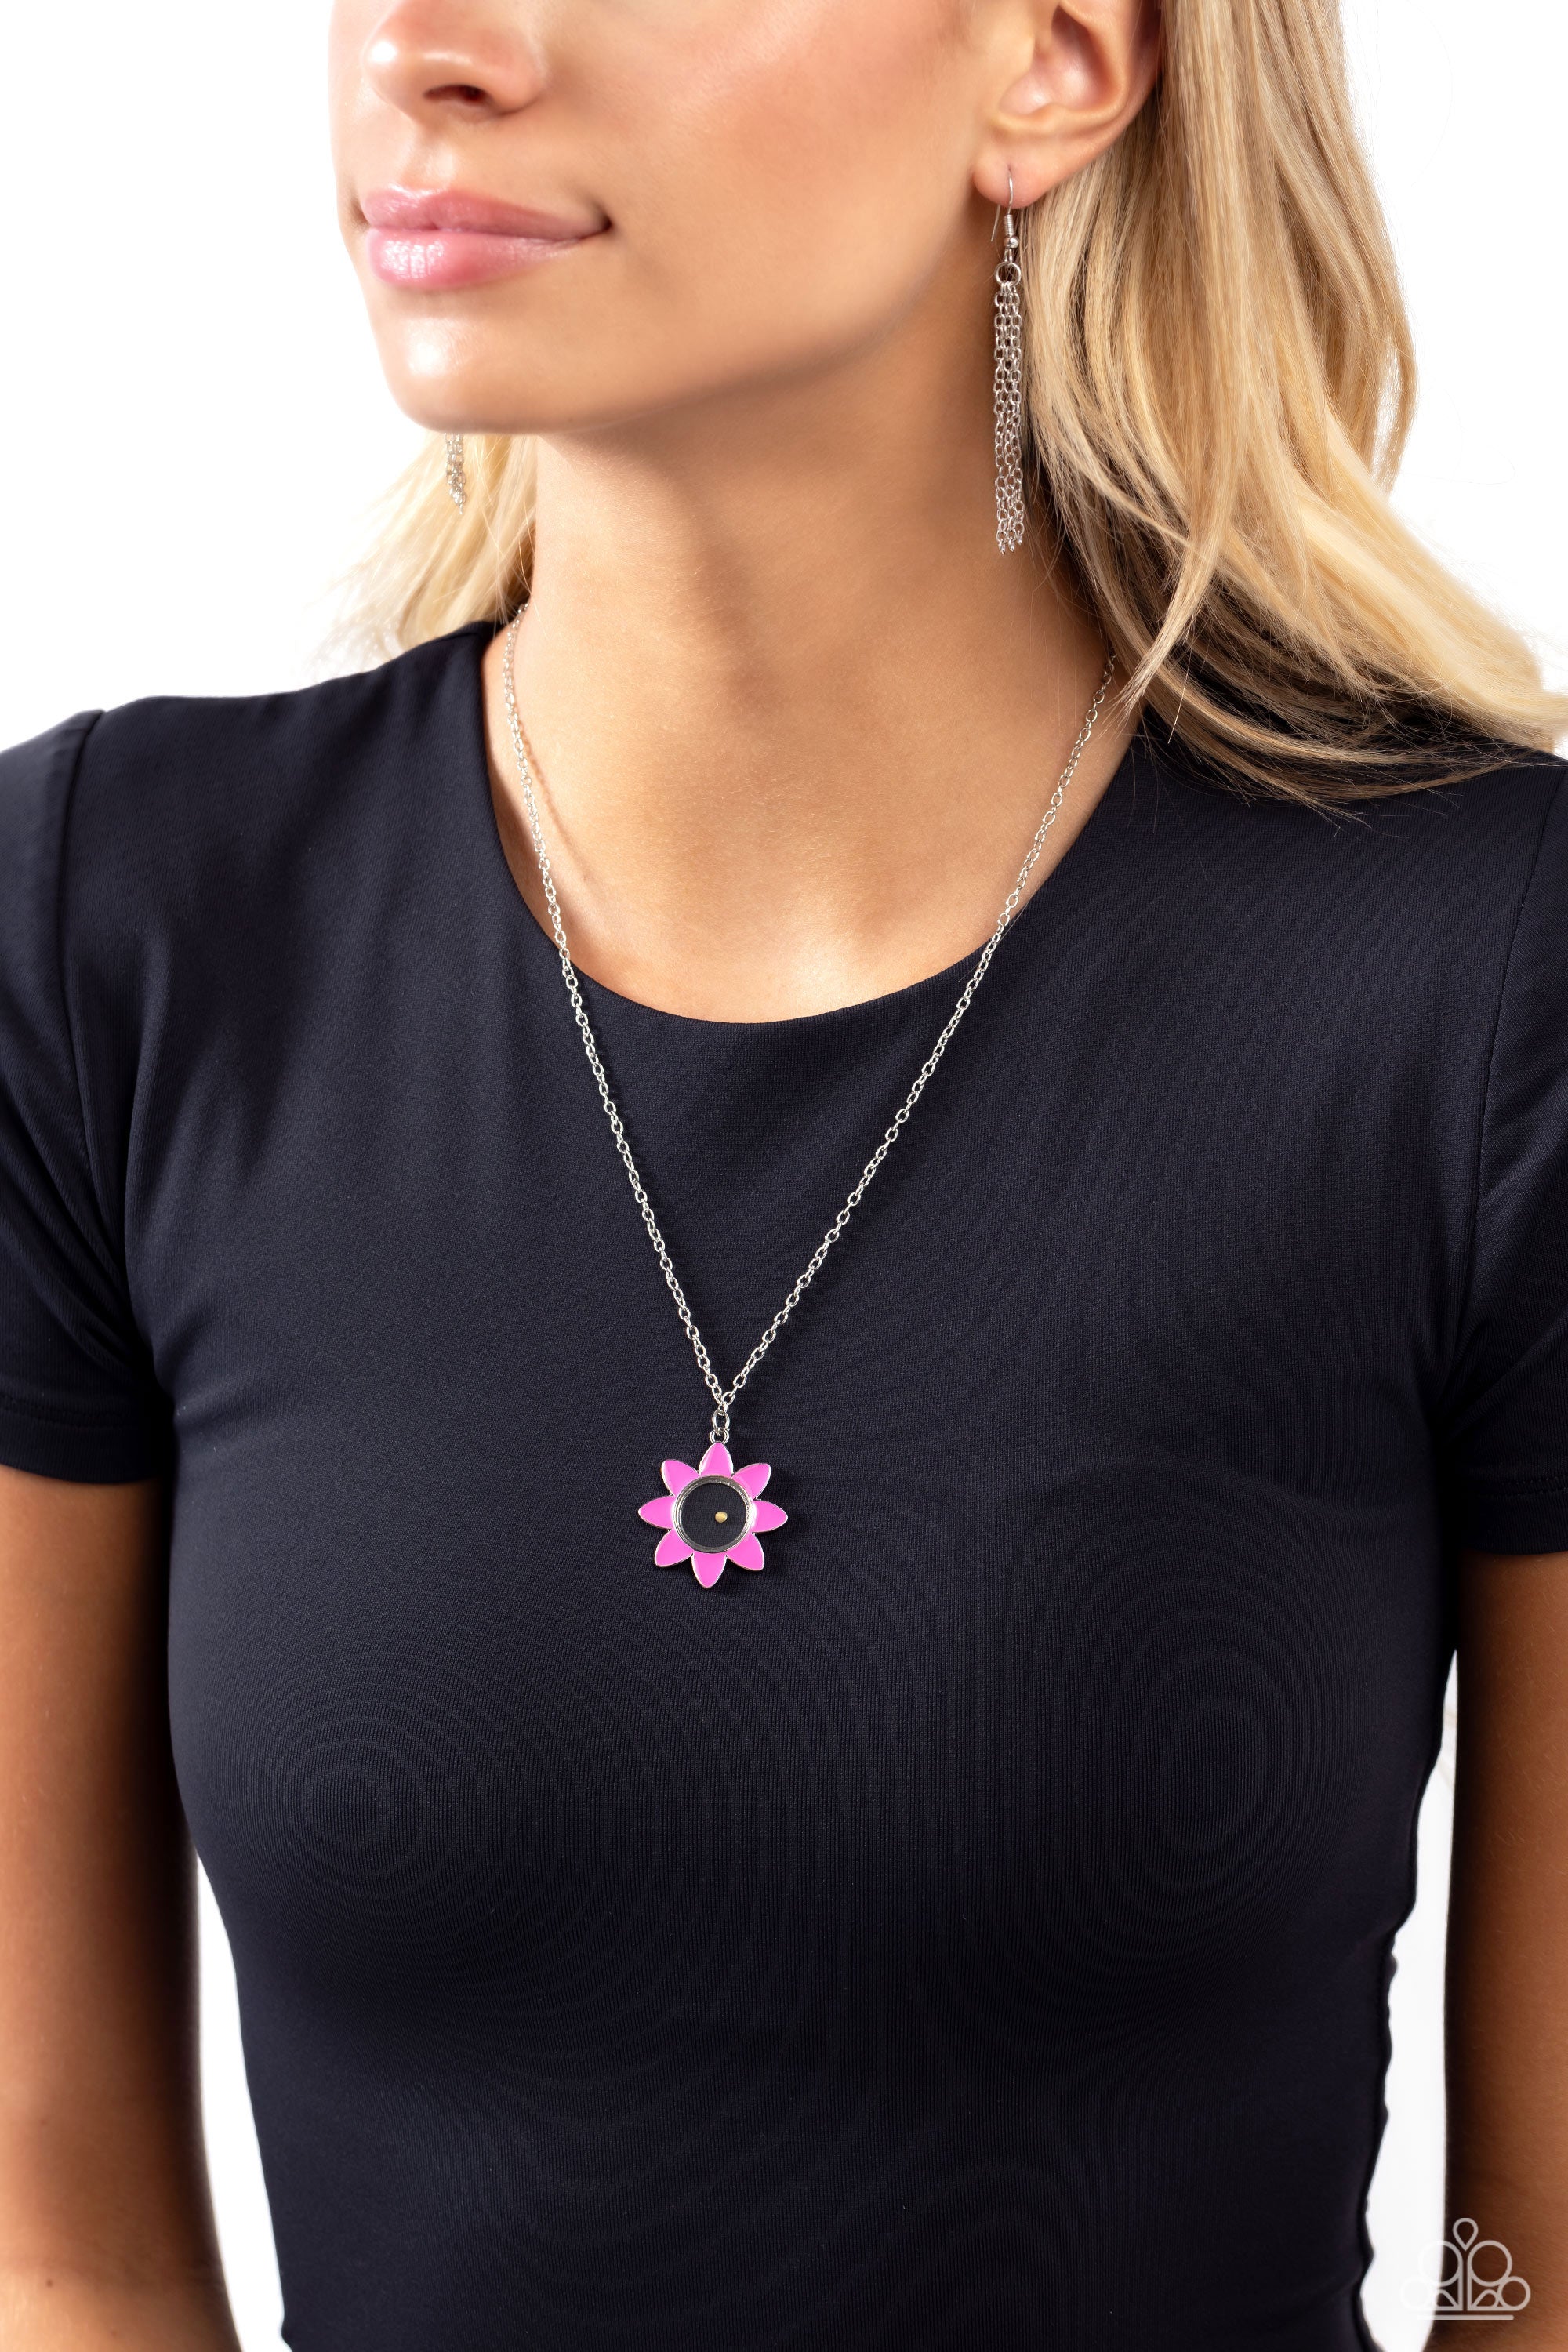 PETALS OF INSPIRATION PINK-NECKLACE